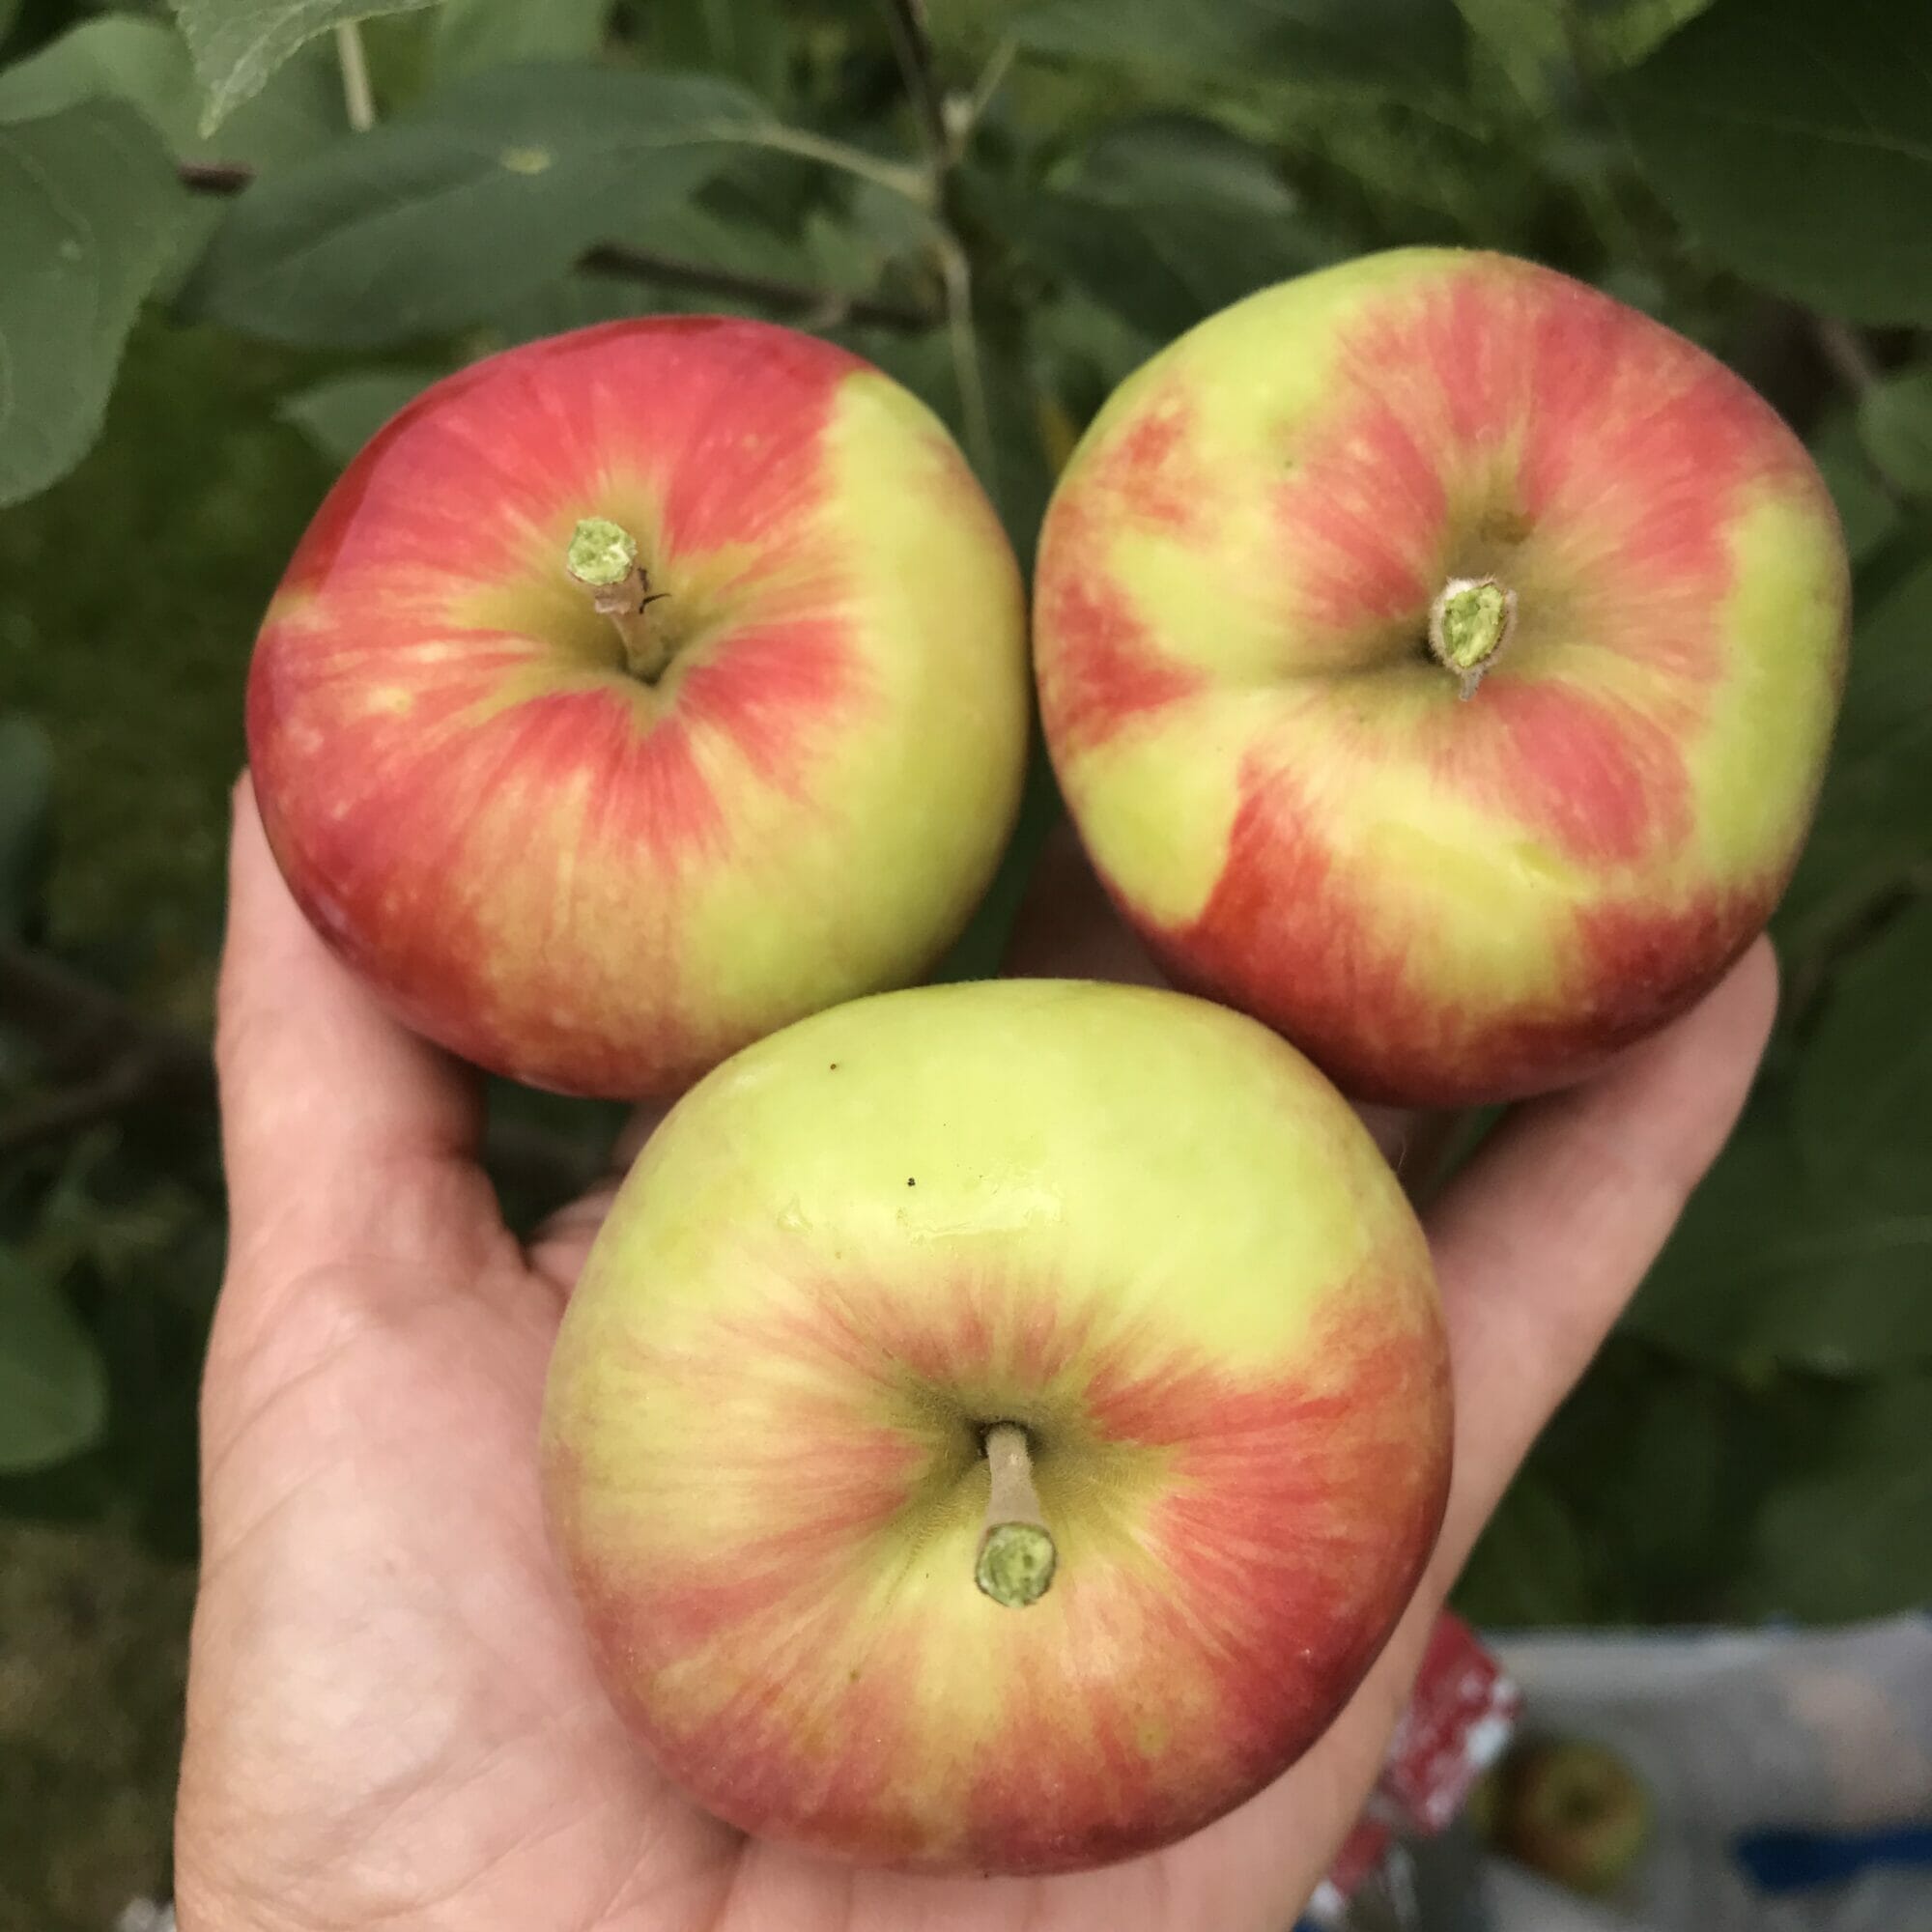 Fuji Apples Are Ready! Tomatoes Still Available but Winding Down